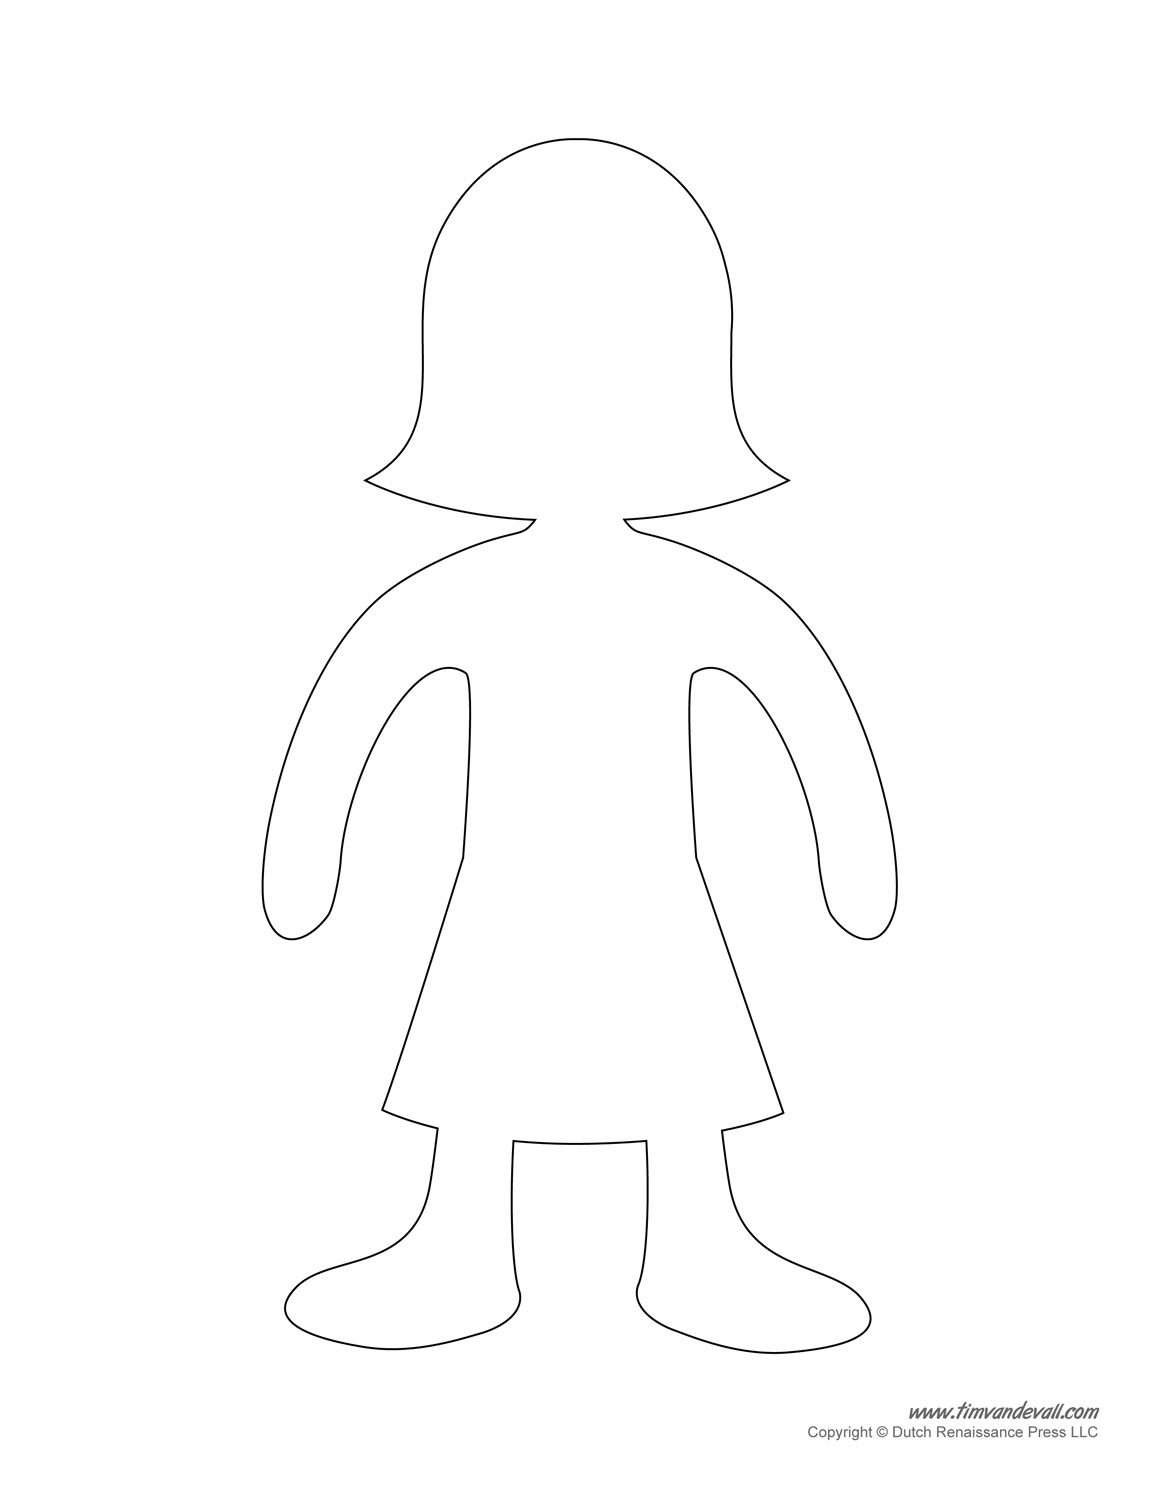 blank-paper-doll-template